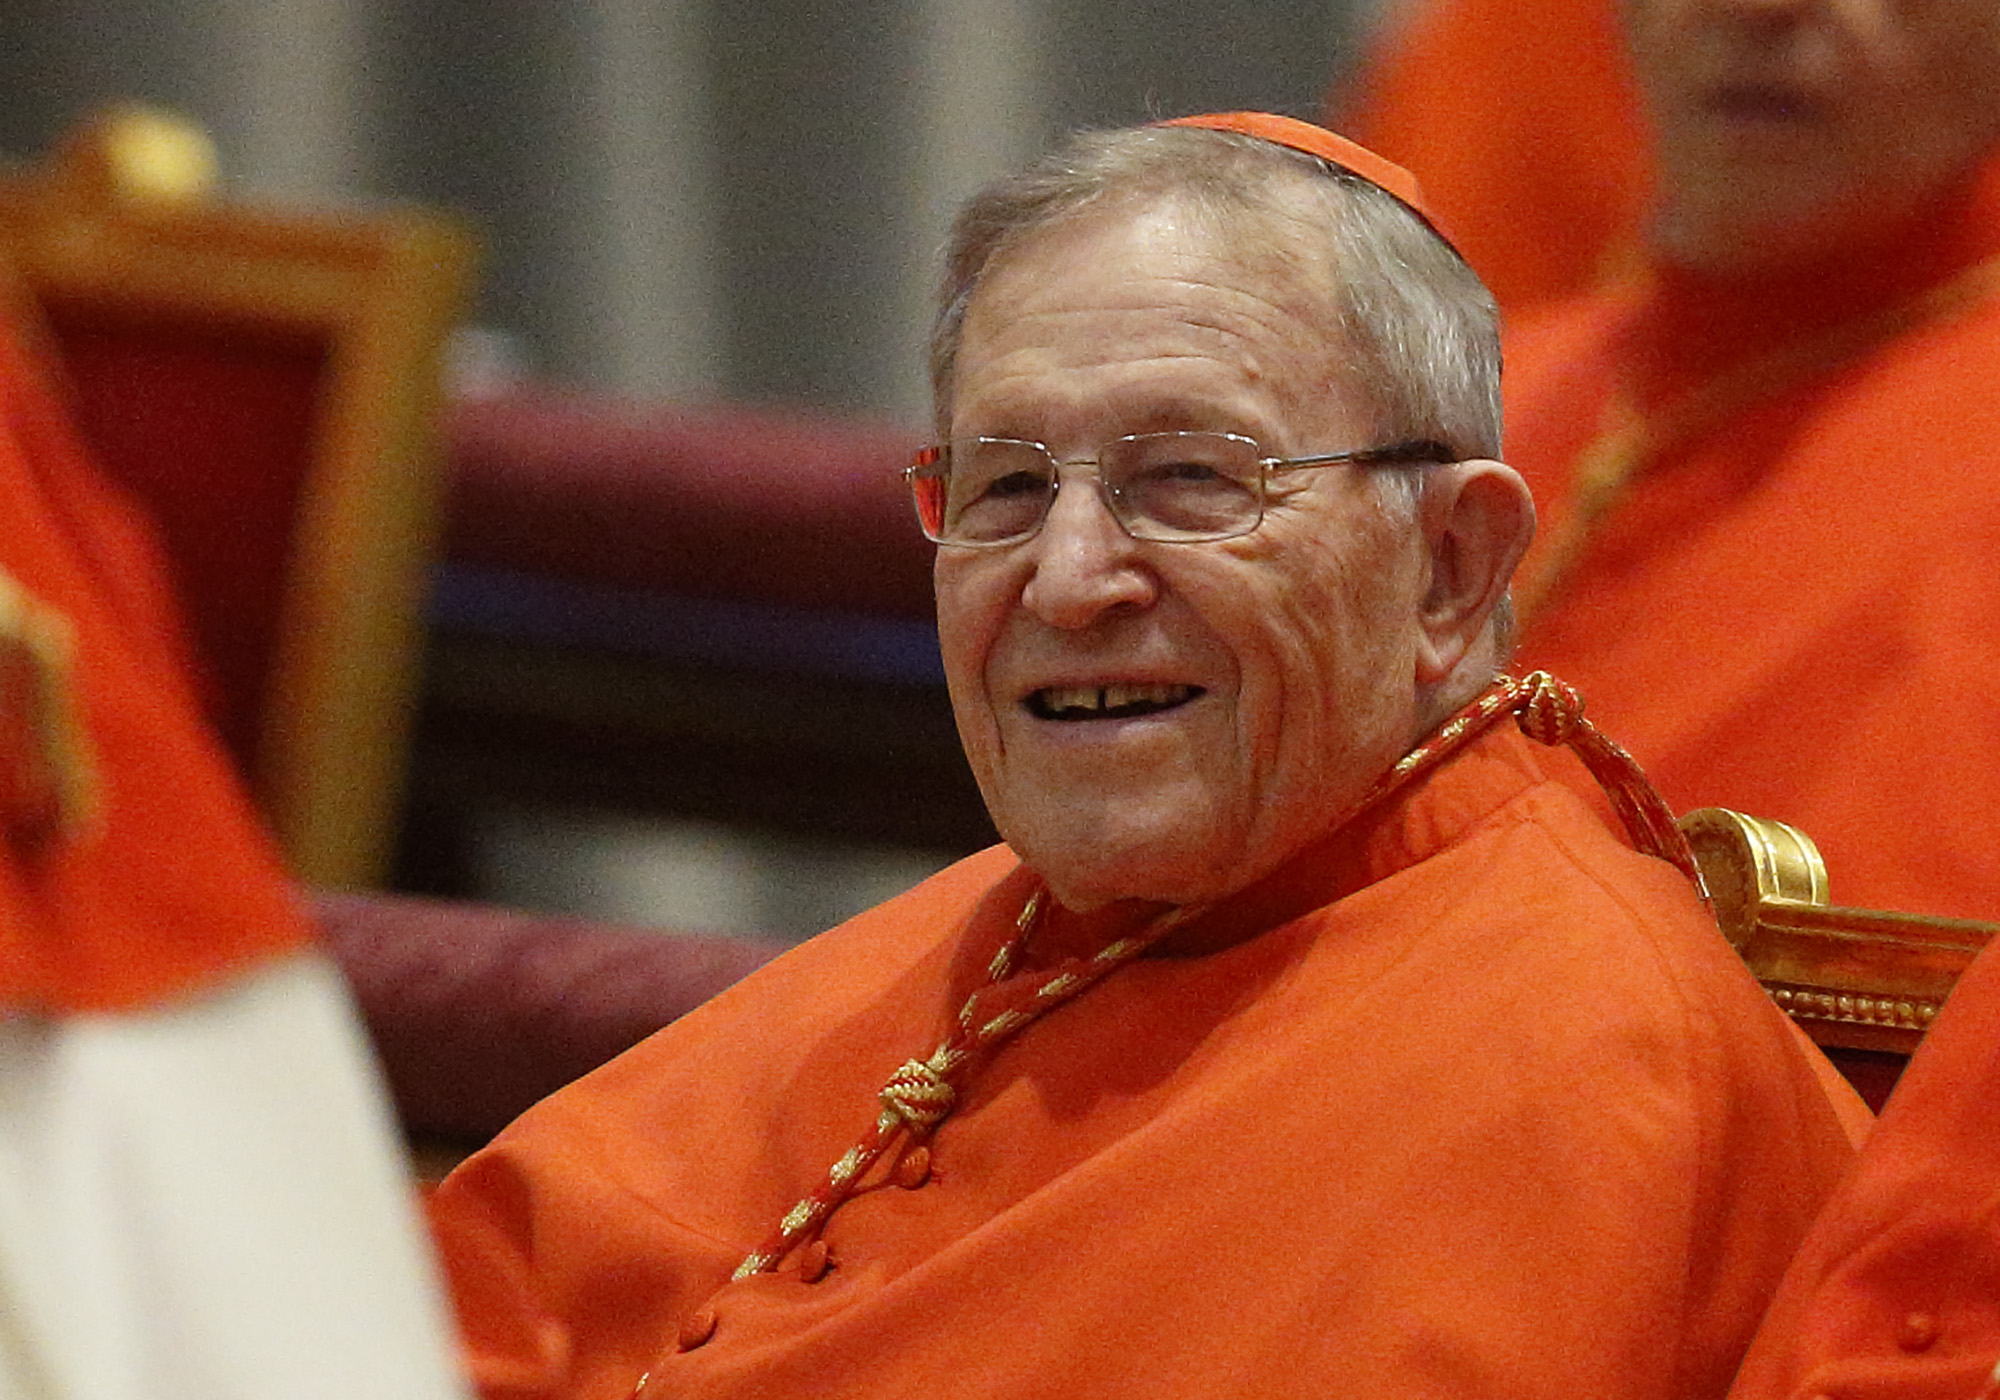 Claims of heresy over 'Amoris Laetitia' are out of place, cardinal says